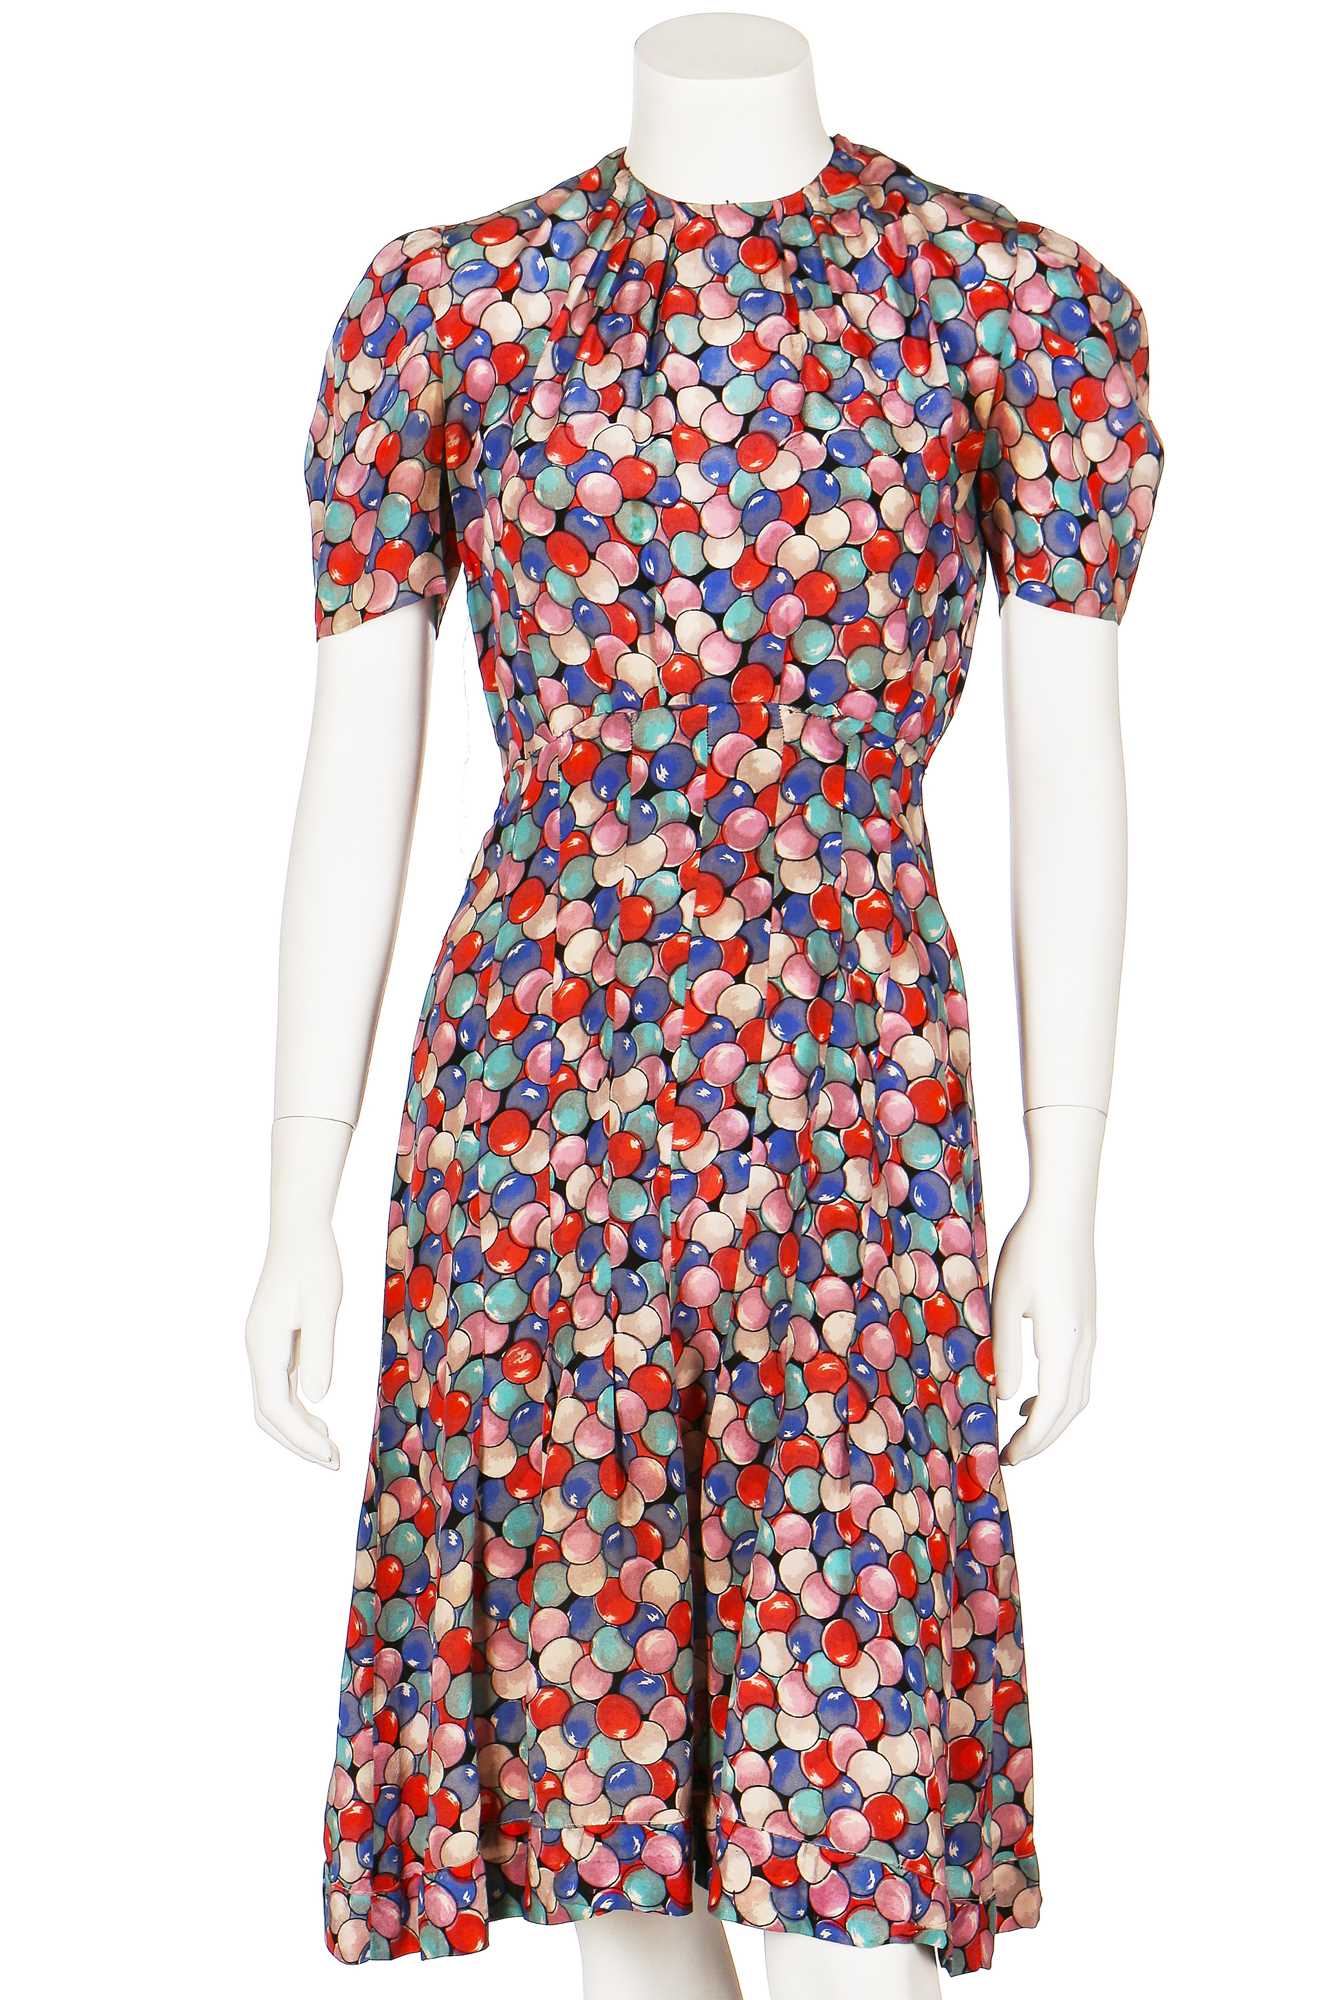 Lot 72 - Eight mainly printed summer day dresses, 1940s